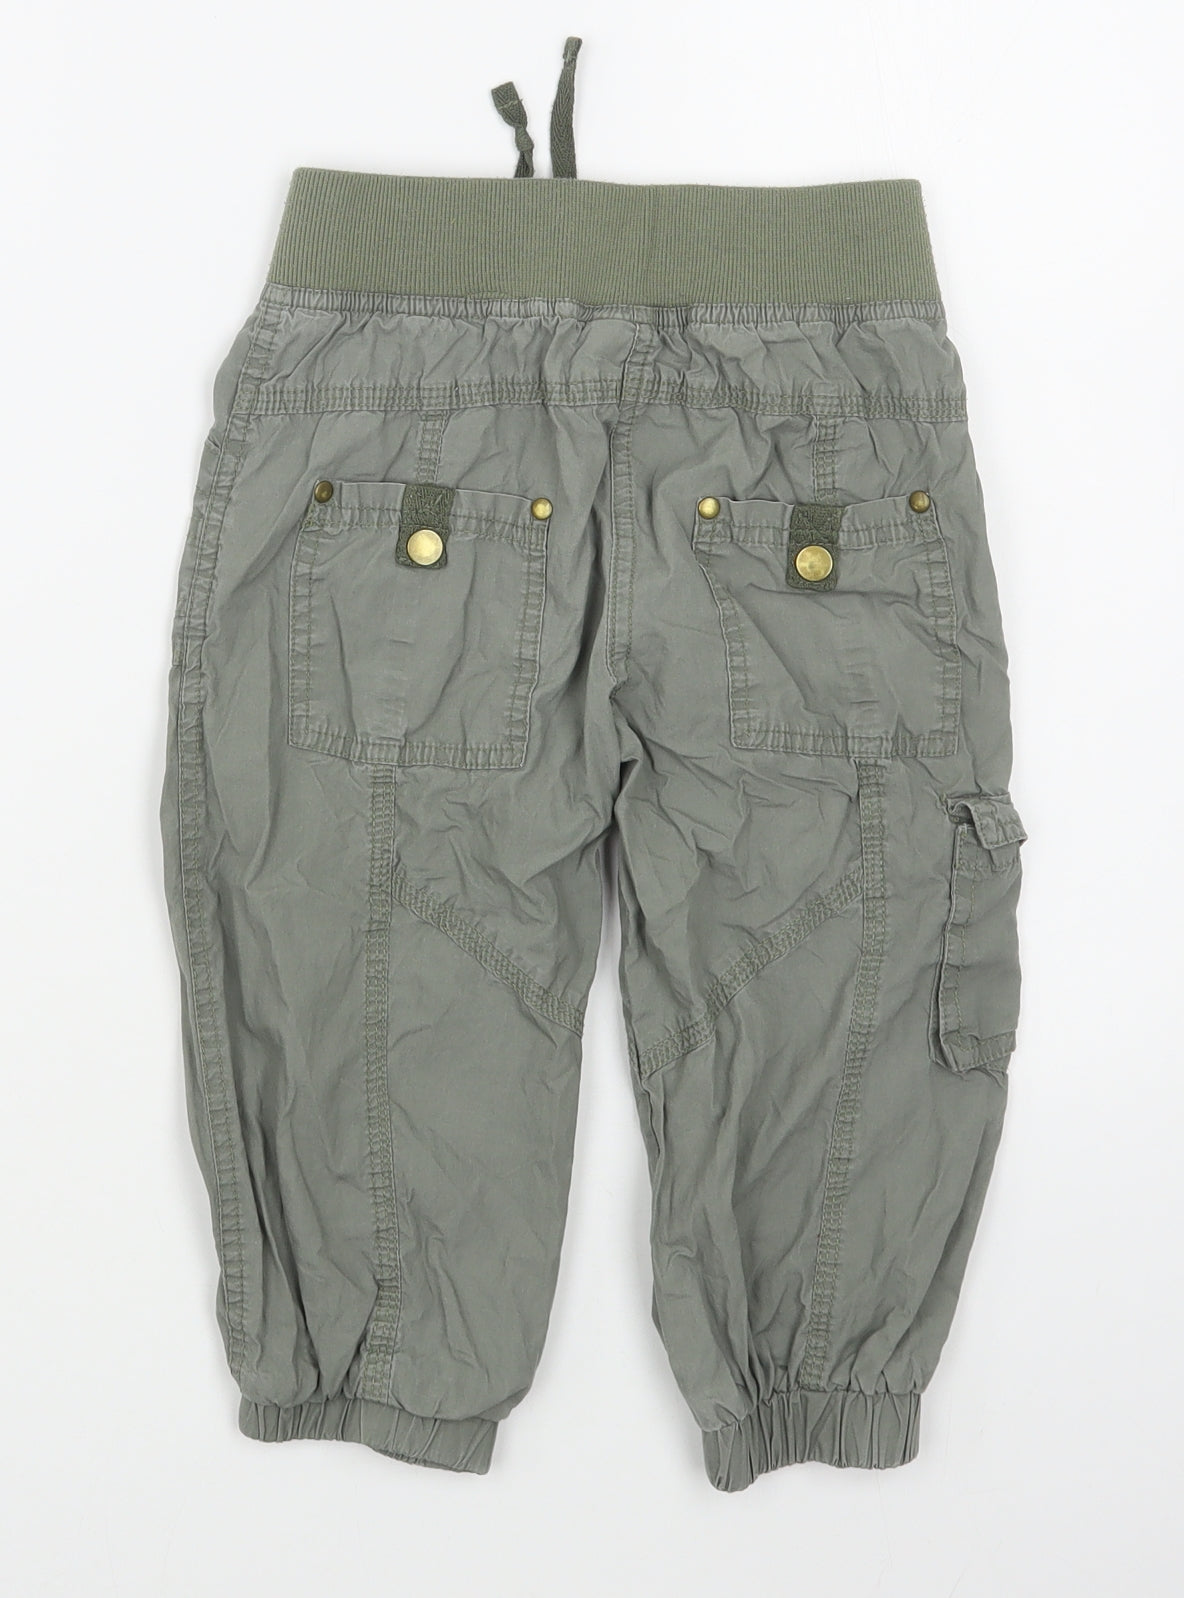 Dunnes Stores Boys Green  100% Cotton Cargo Trousers Size 8 Years  Regular